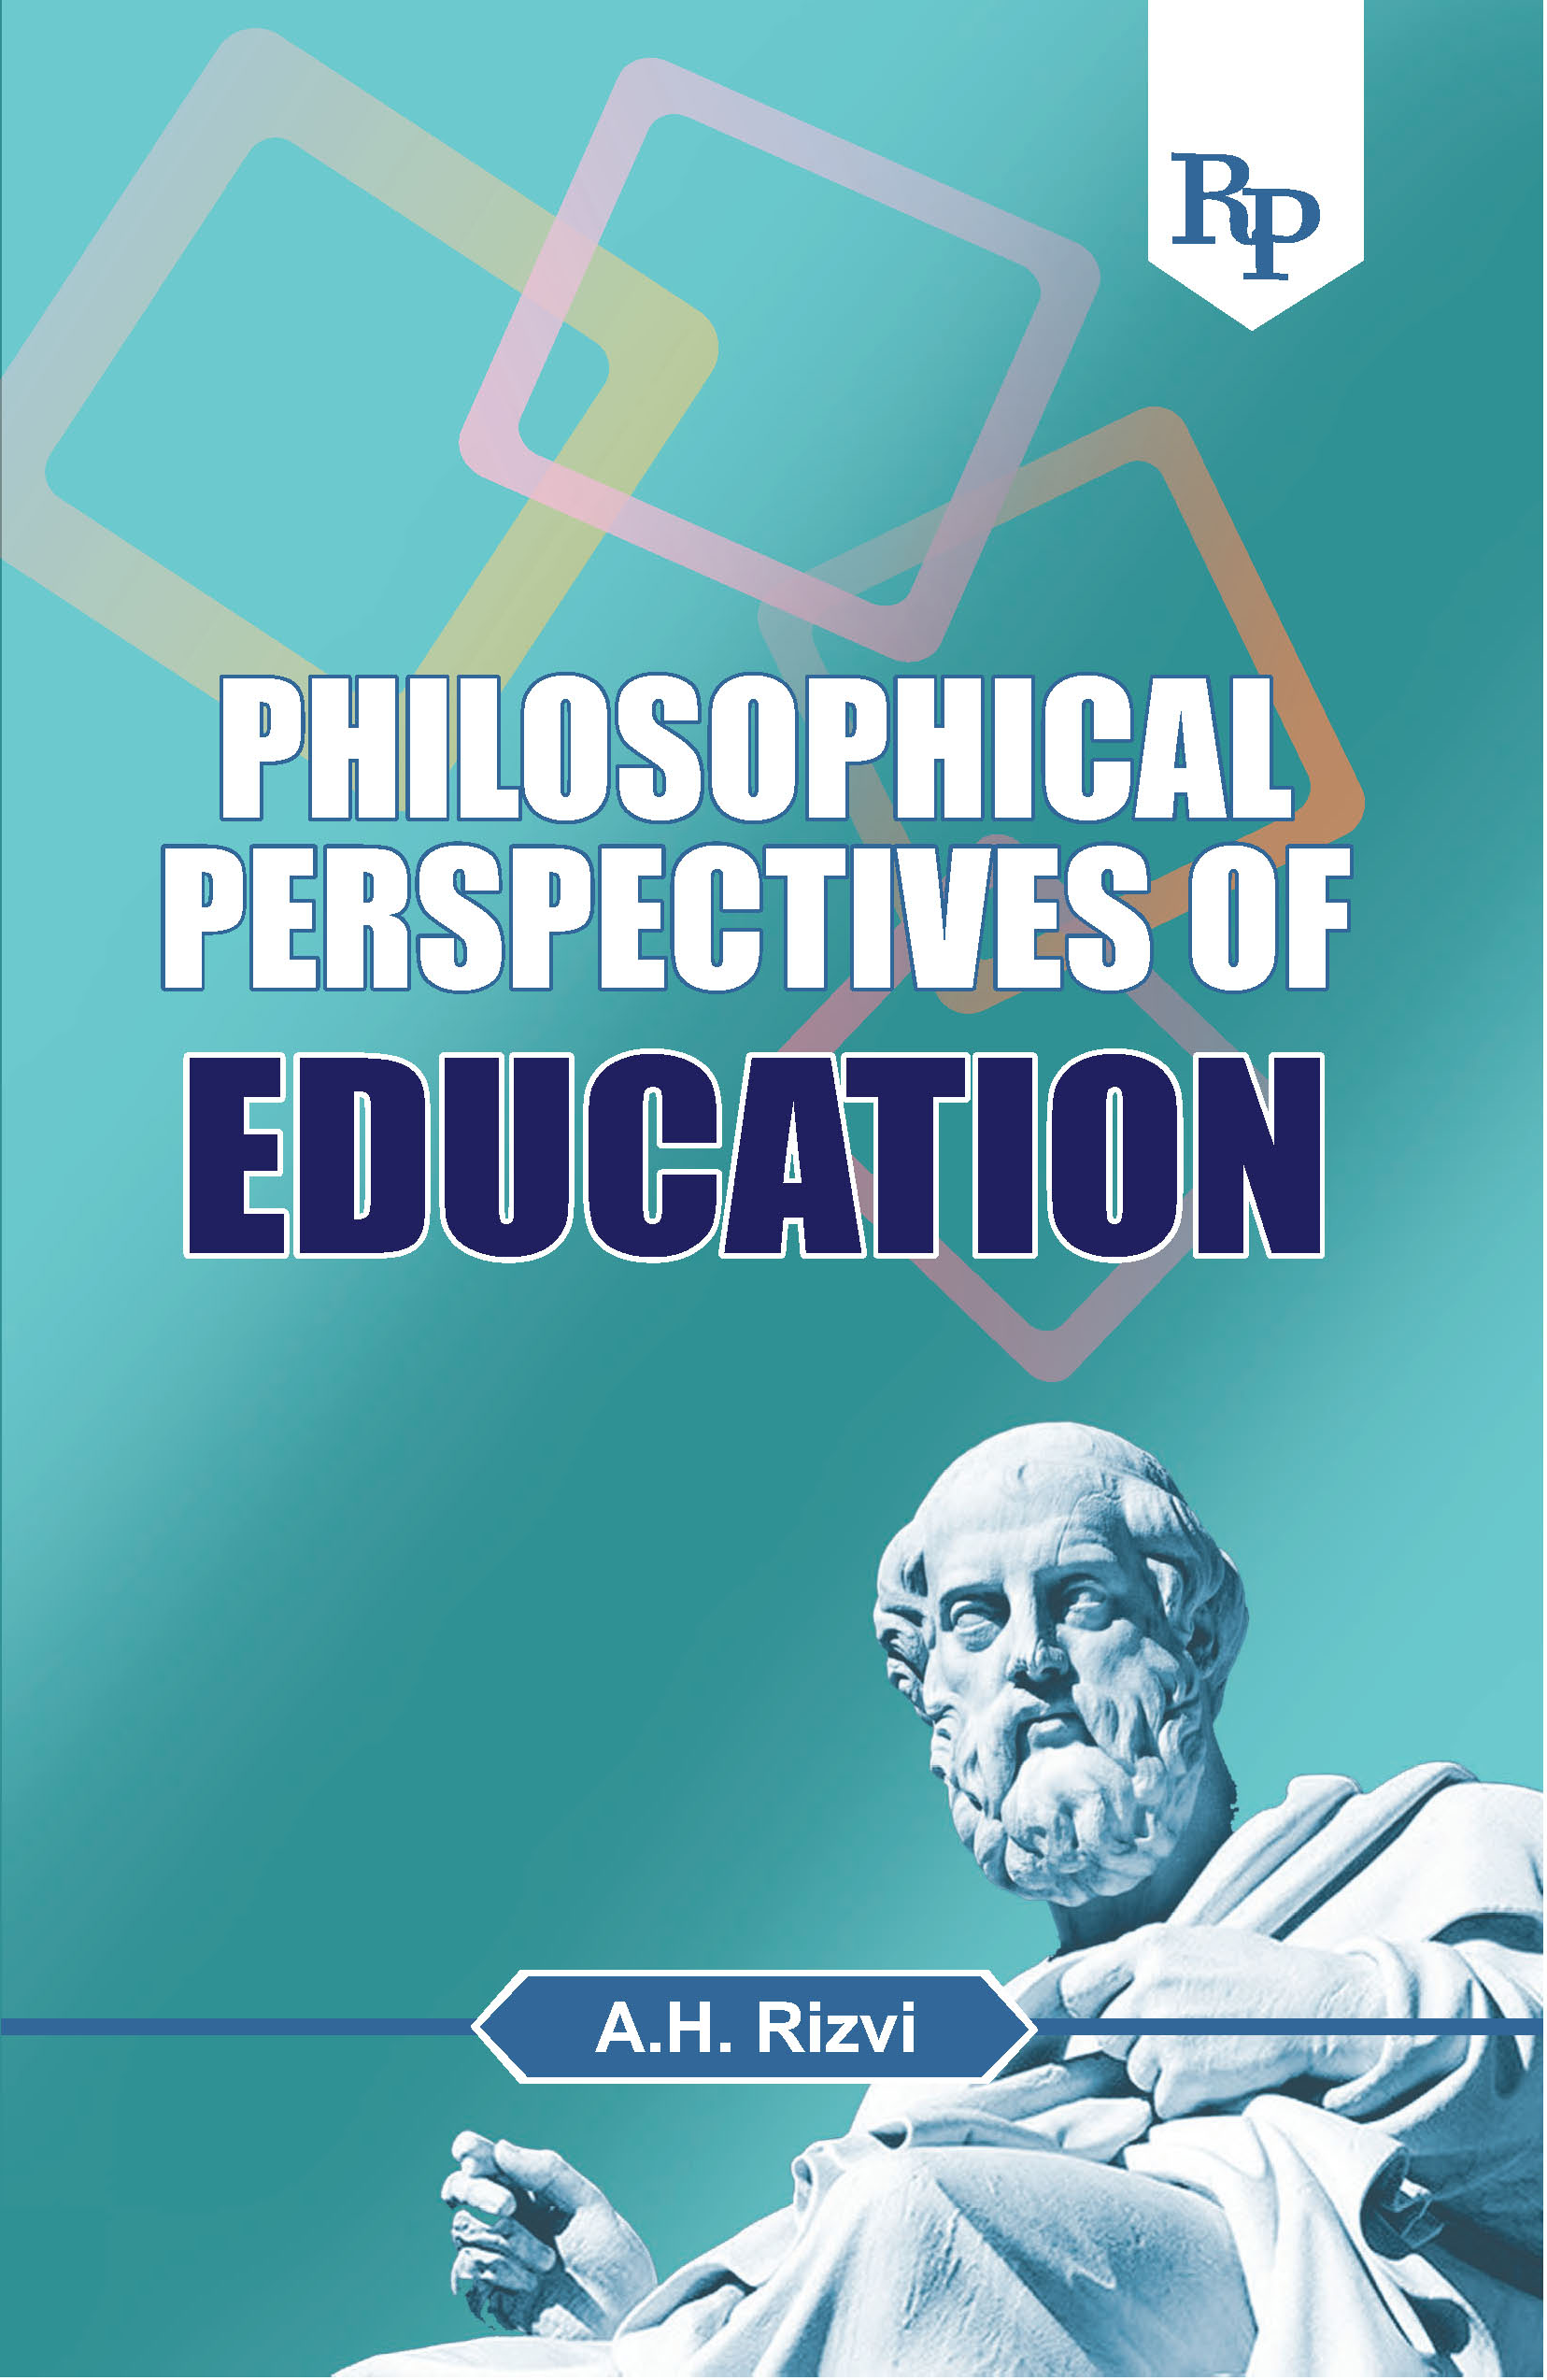 Philosophical Perspectives of Education COVER.jpg